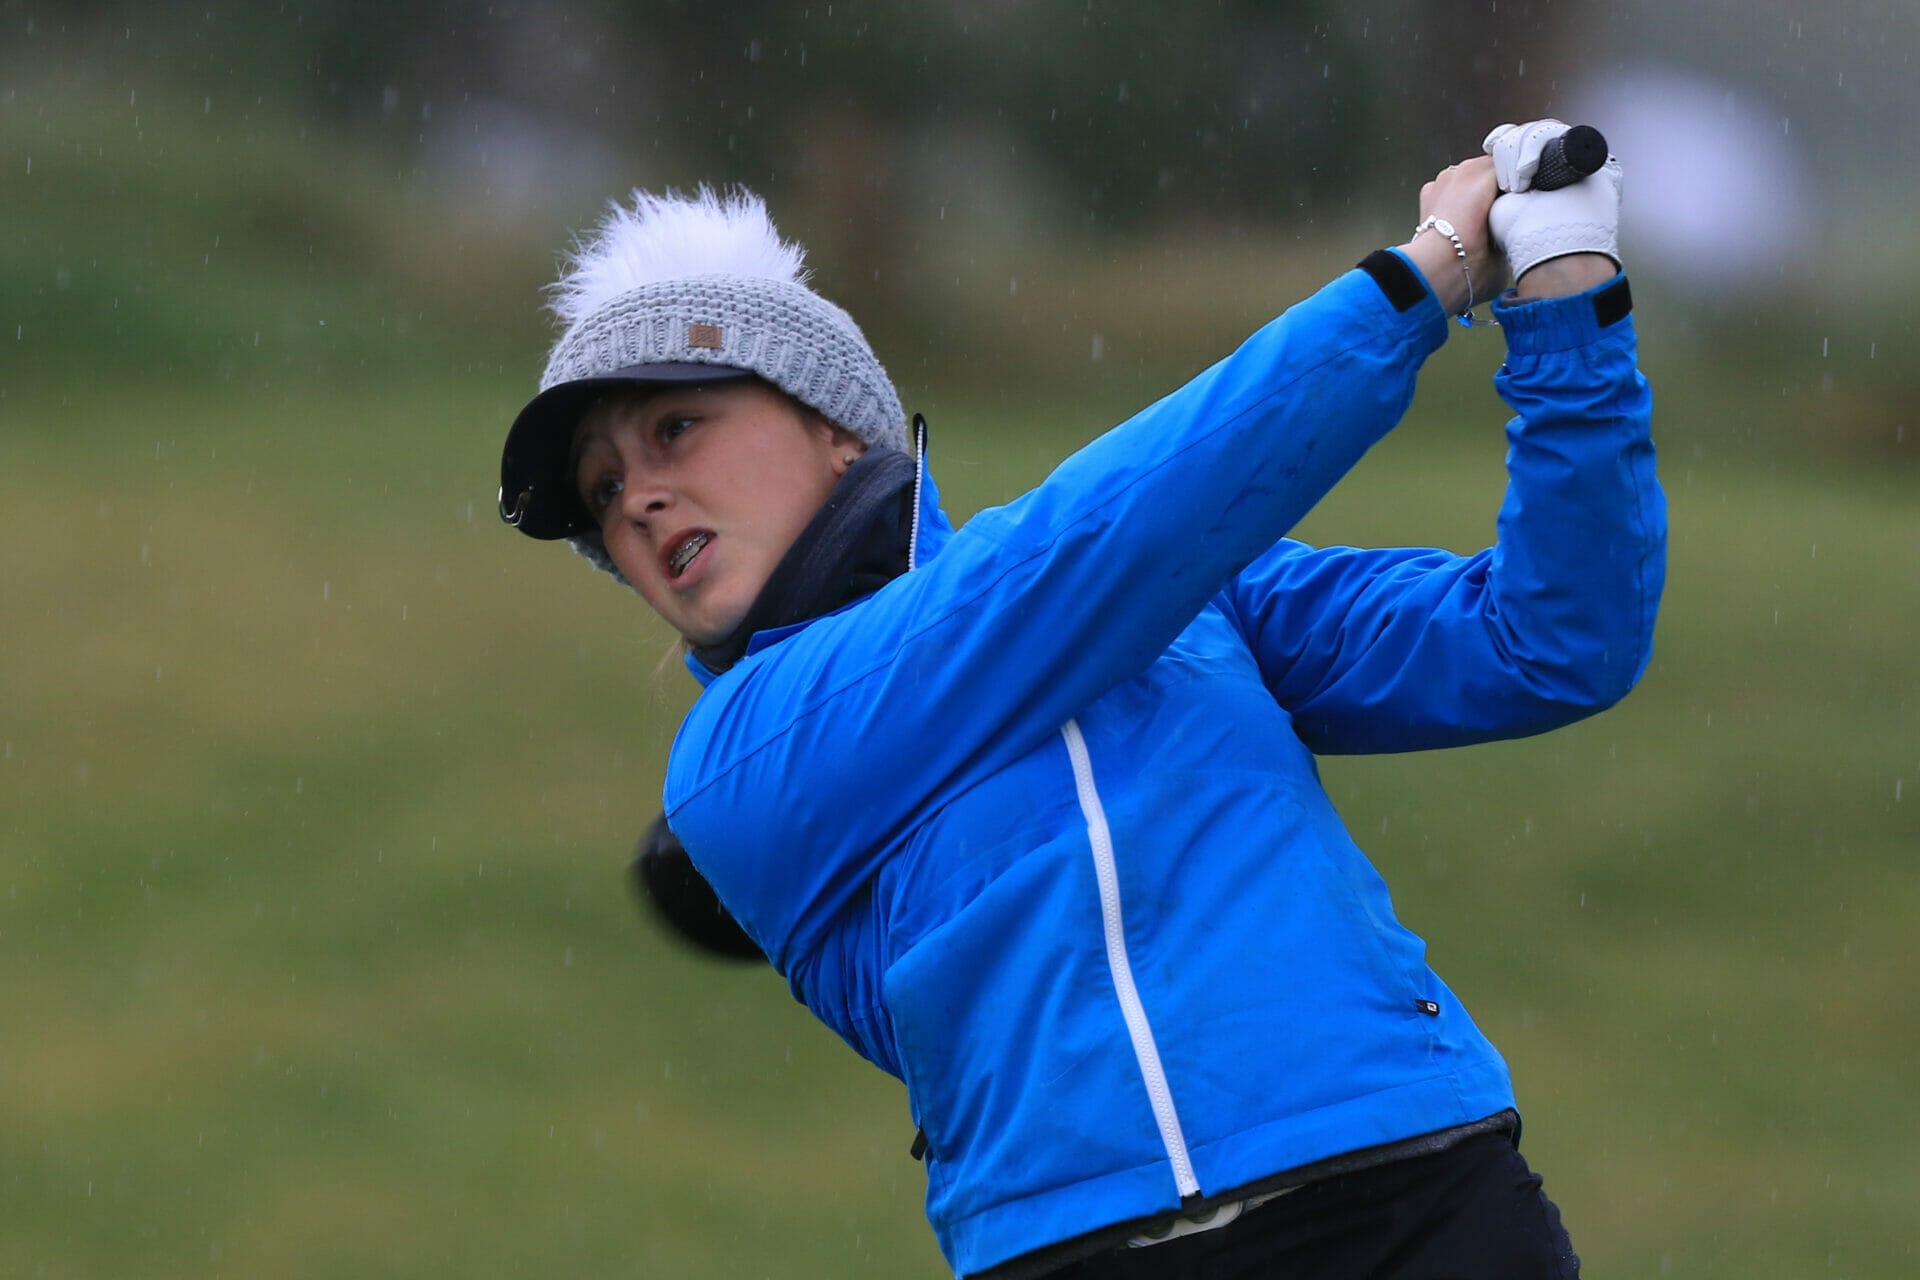 Ffion Tynan (WAL) on the 1st tee during Round 1 of the Irish Girls U18 Open Stroke Play Championship at Roganstown Golf & Country Club, Dublin, Ireland. 05/04/19 Picture: Thos Caffrey / www.golffile.ie